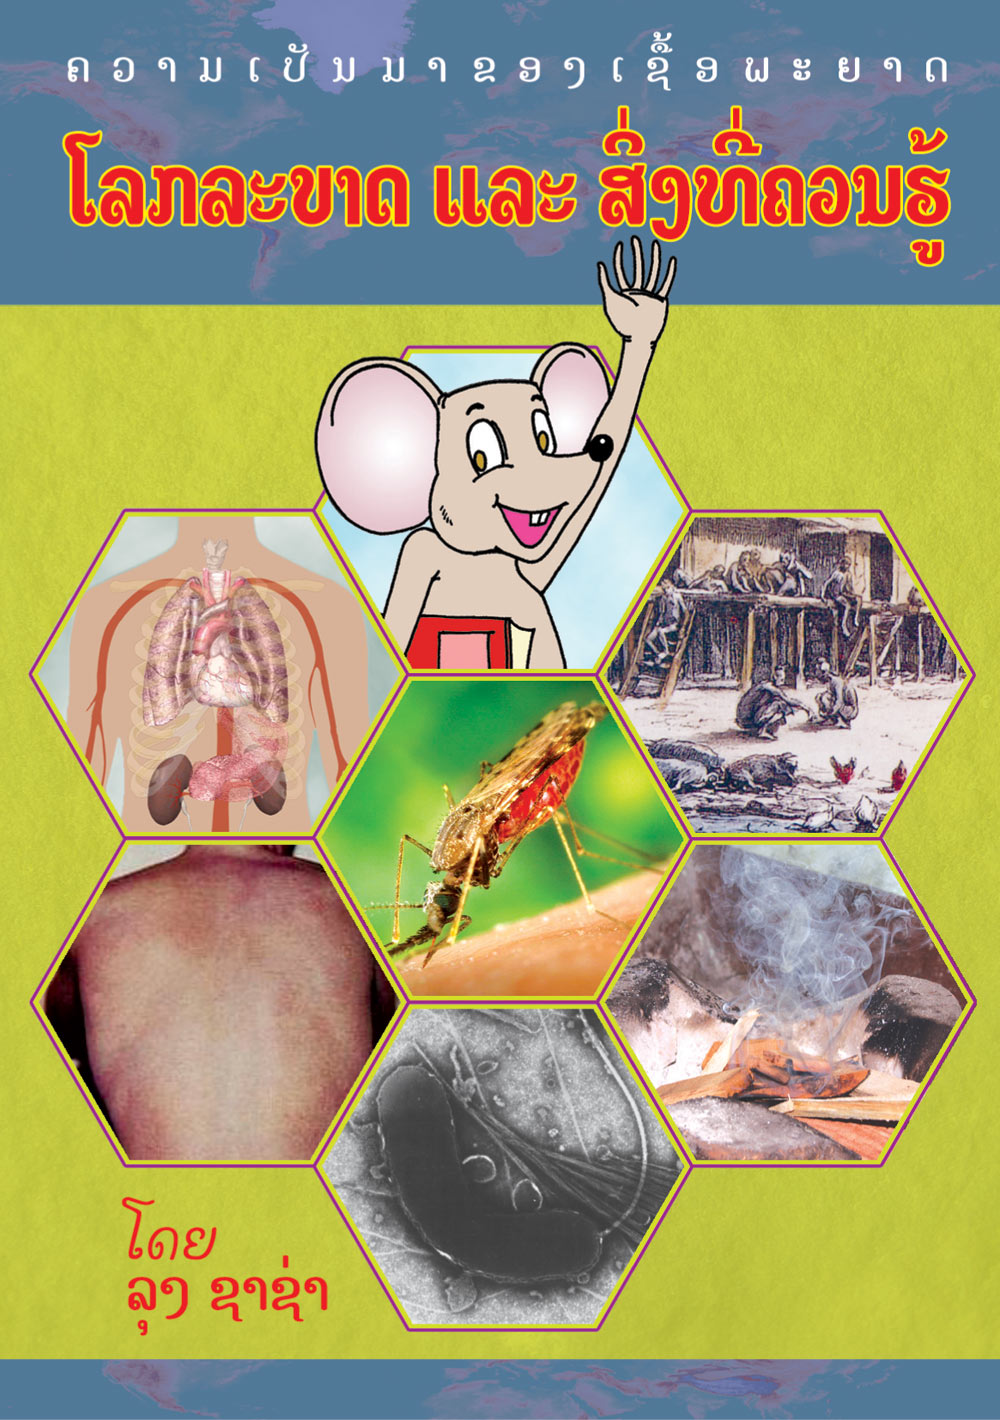 Health and disease large book cover, published in Lao language